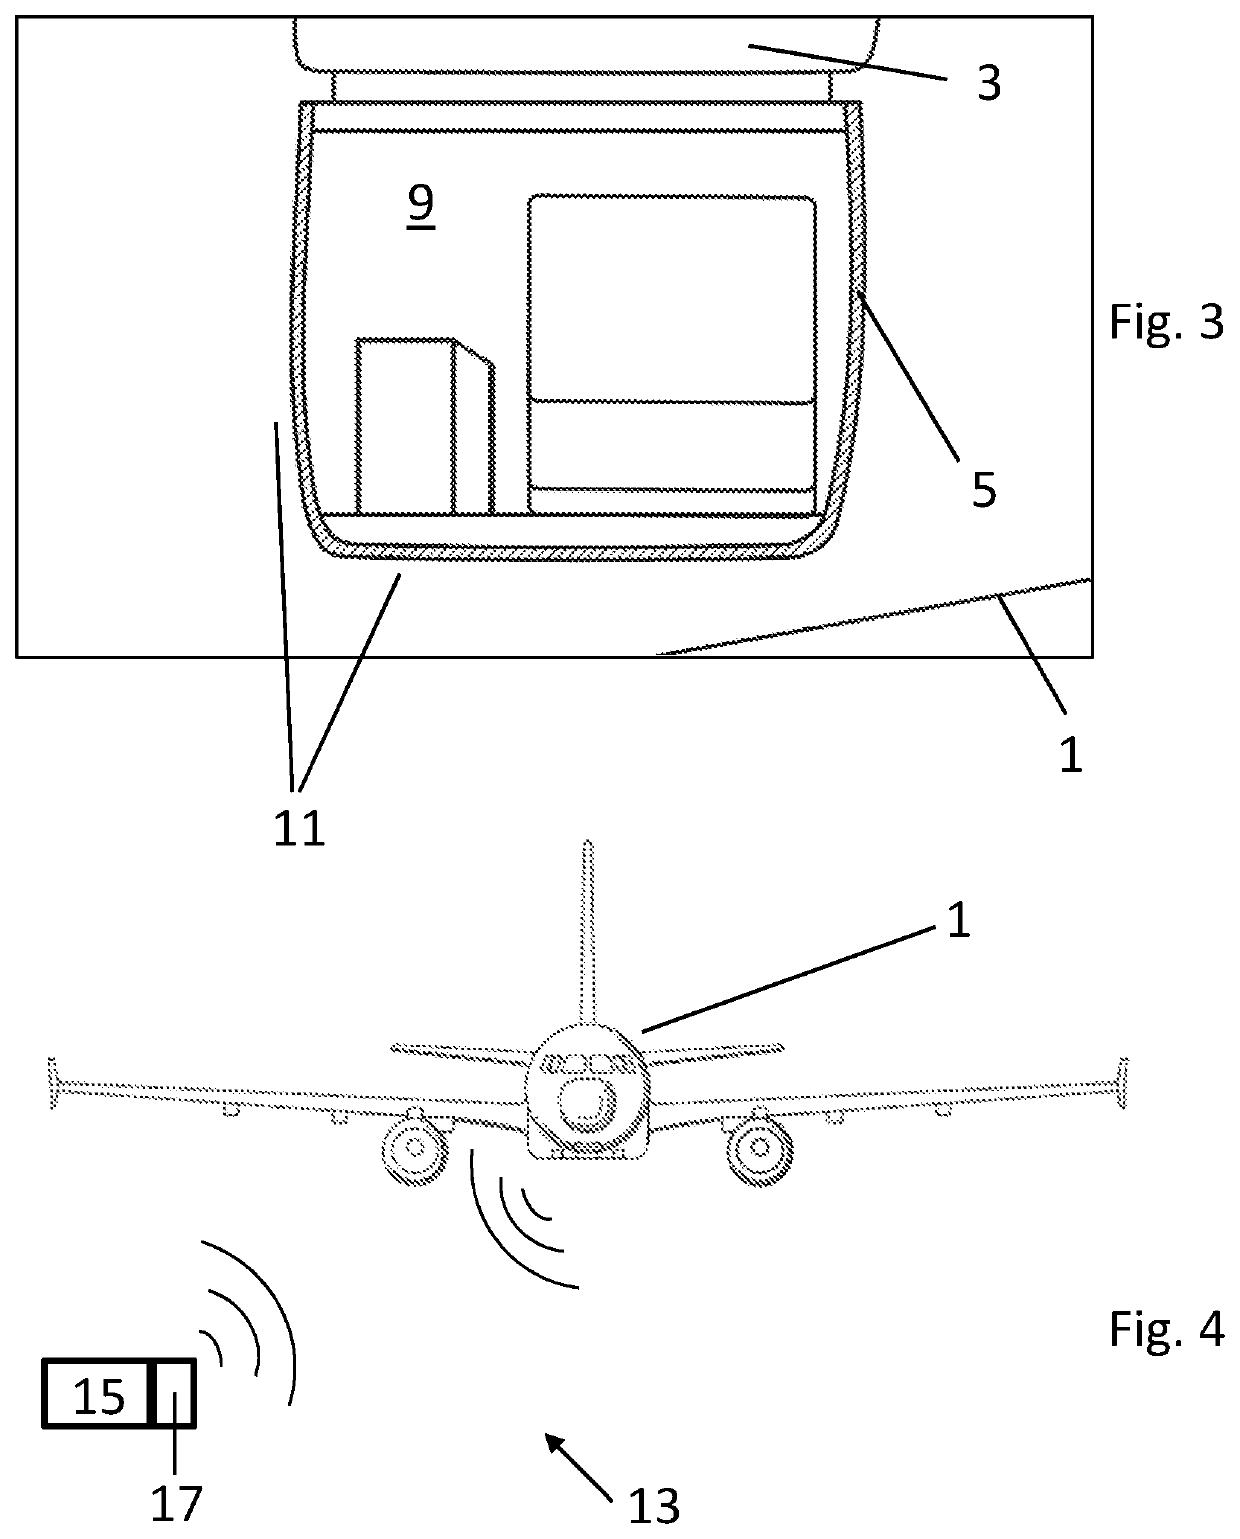 System for displaying the state of at least one cargo door of an aircraft